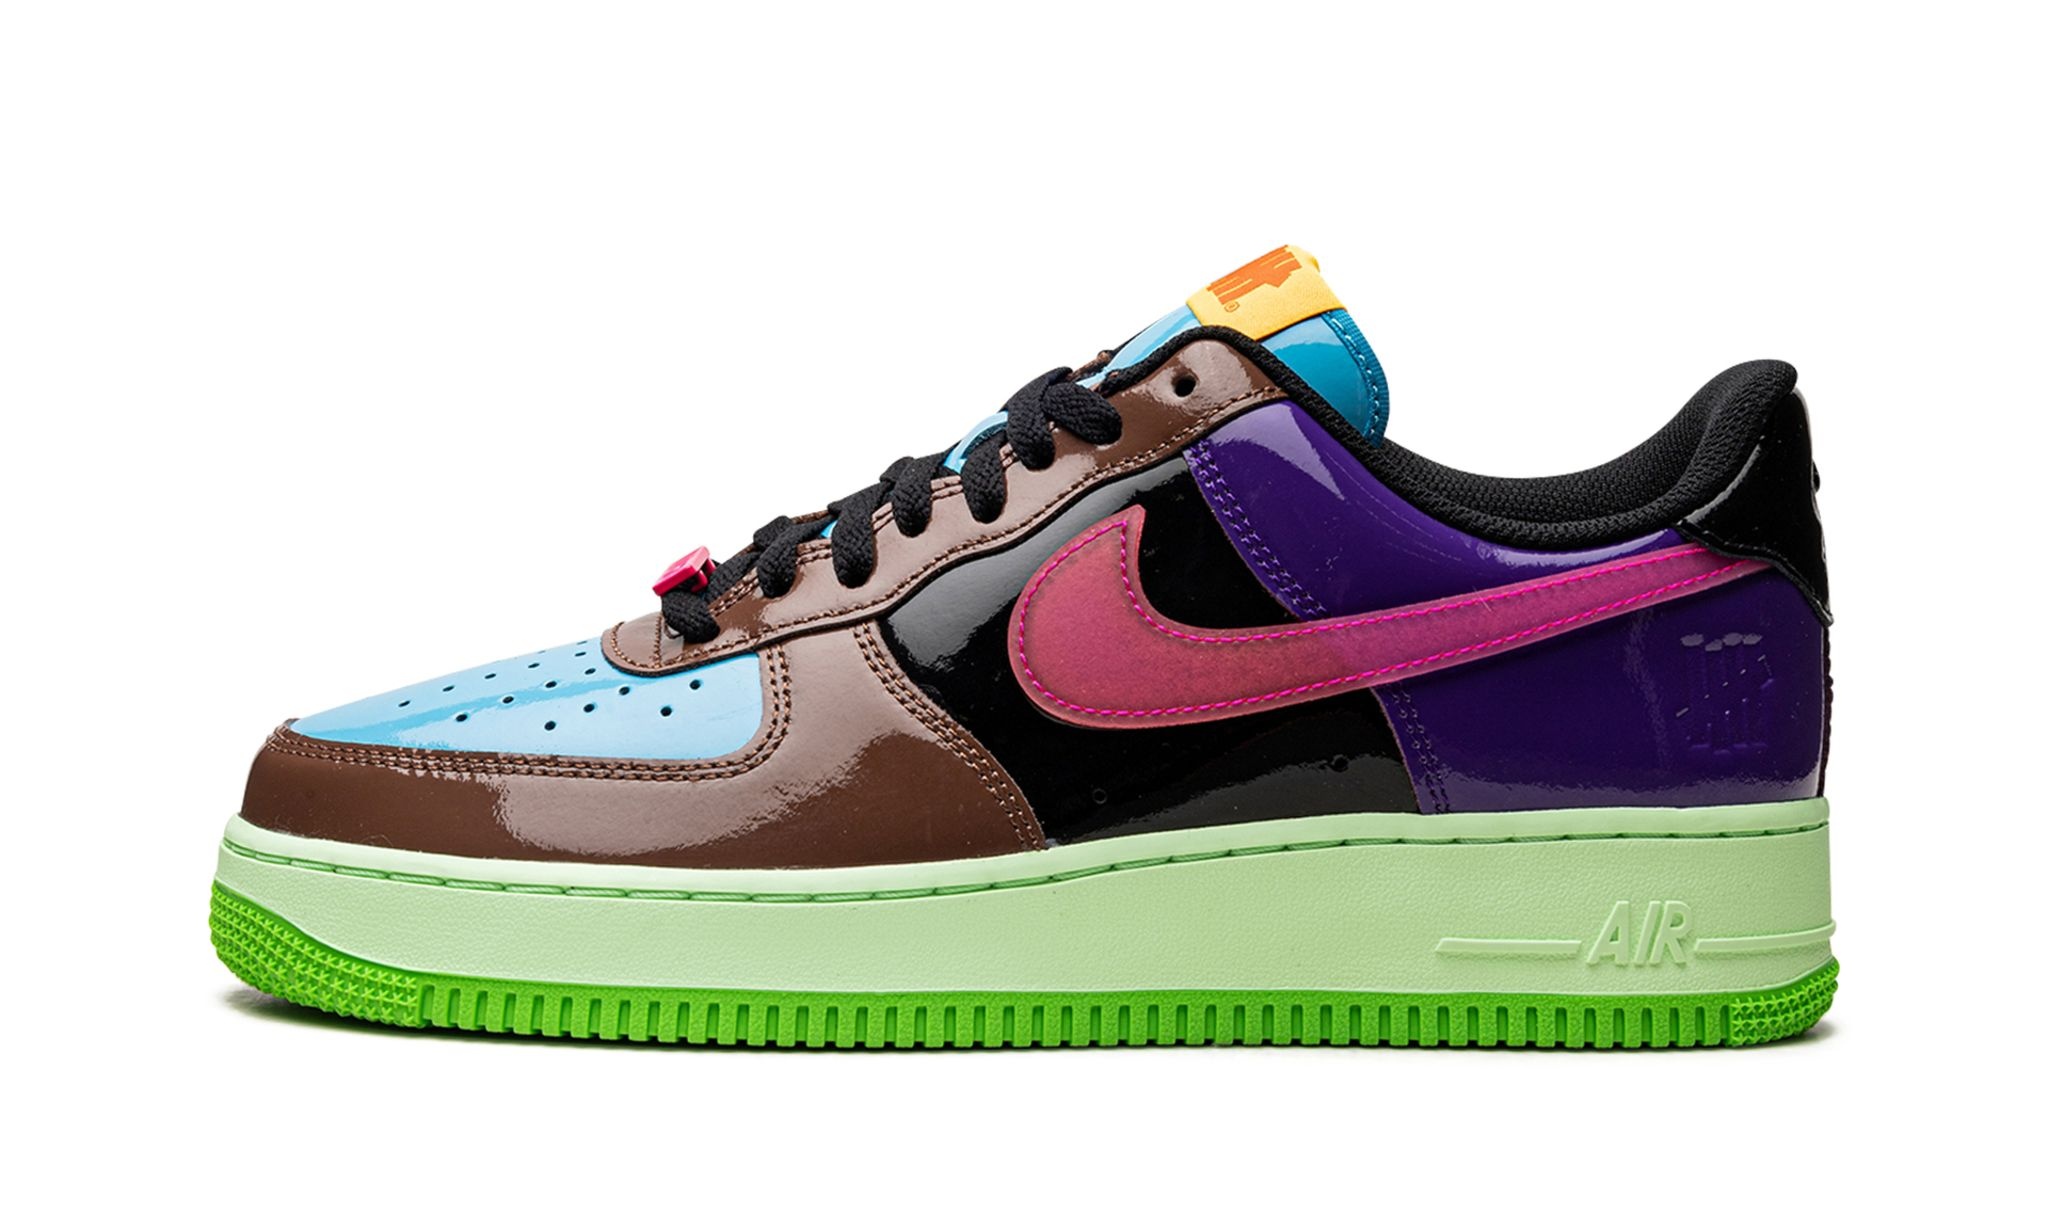 Air Force 1 Low "Undefeated - Pink Prime" - 1